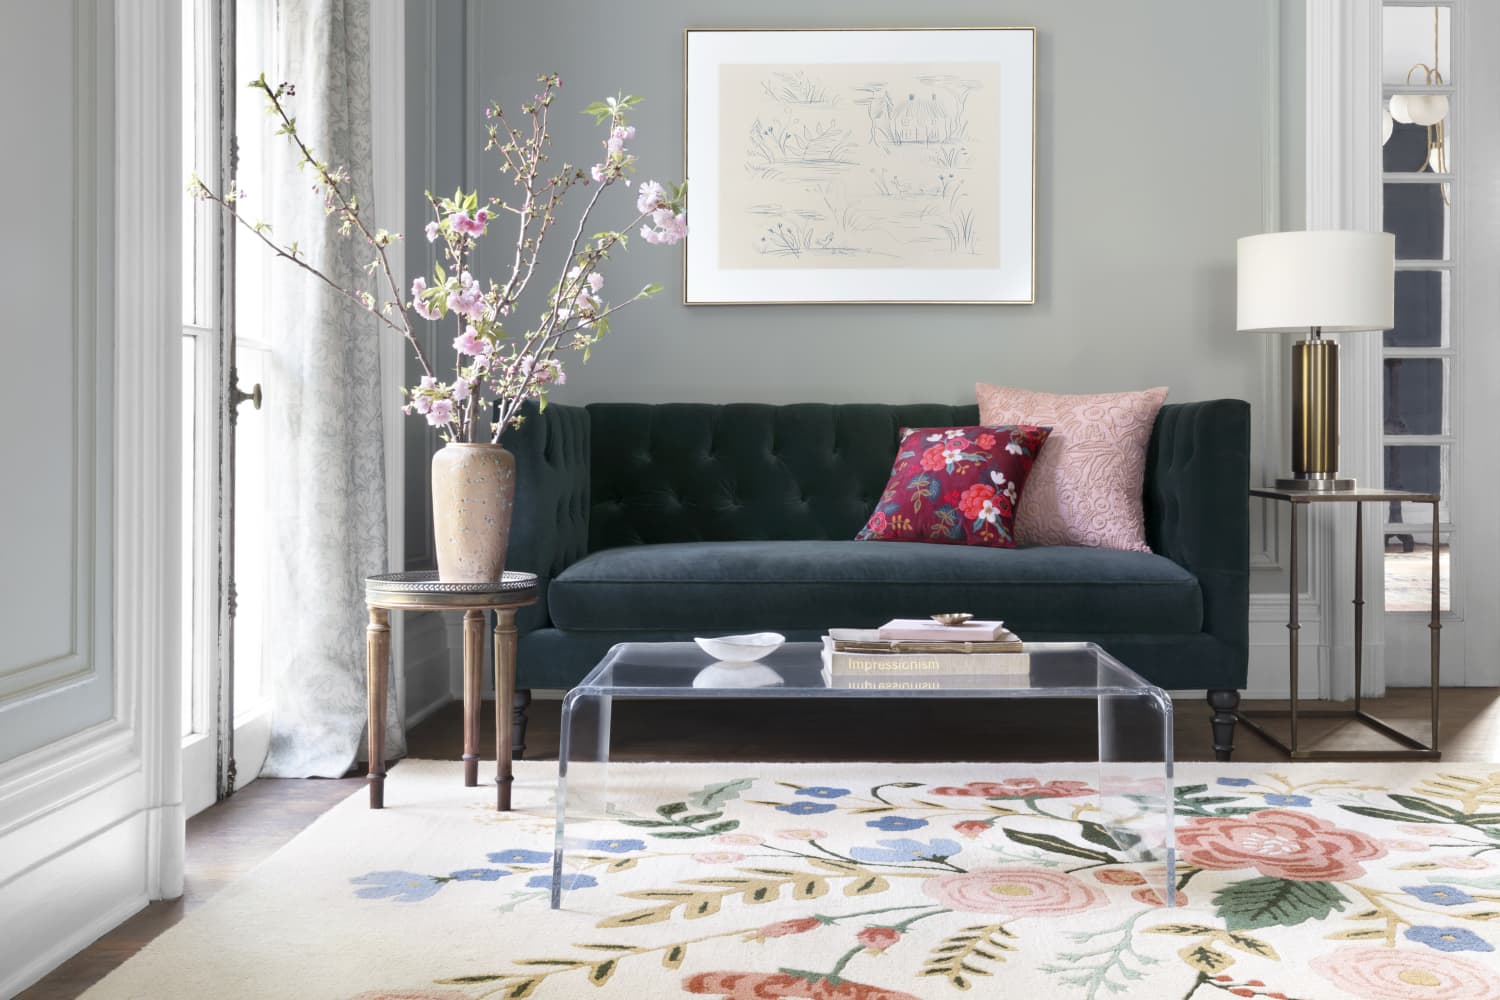 Rifle Paper Co. Is Having a Sale on Some of Their Prettiest Patterned Rugs — Here’s What to Buy ASAP